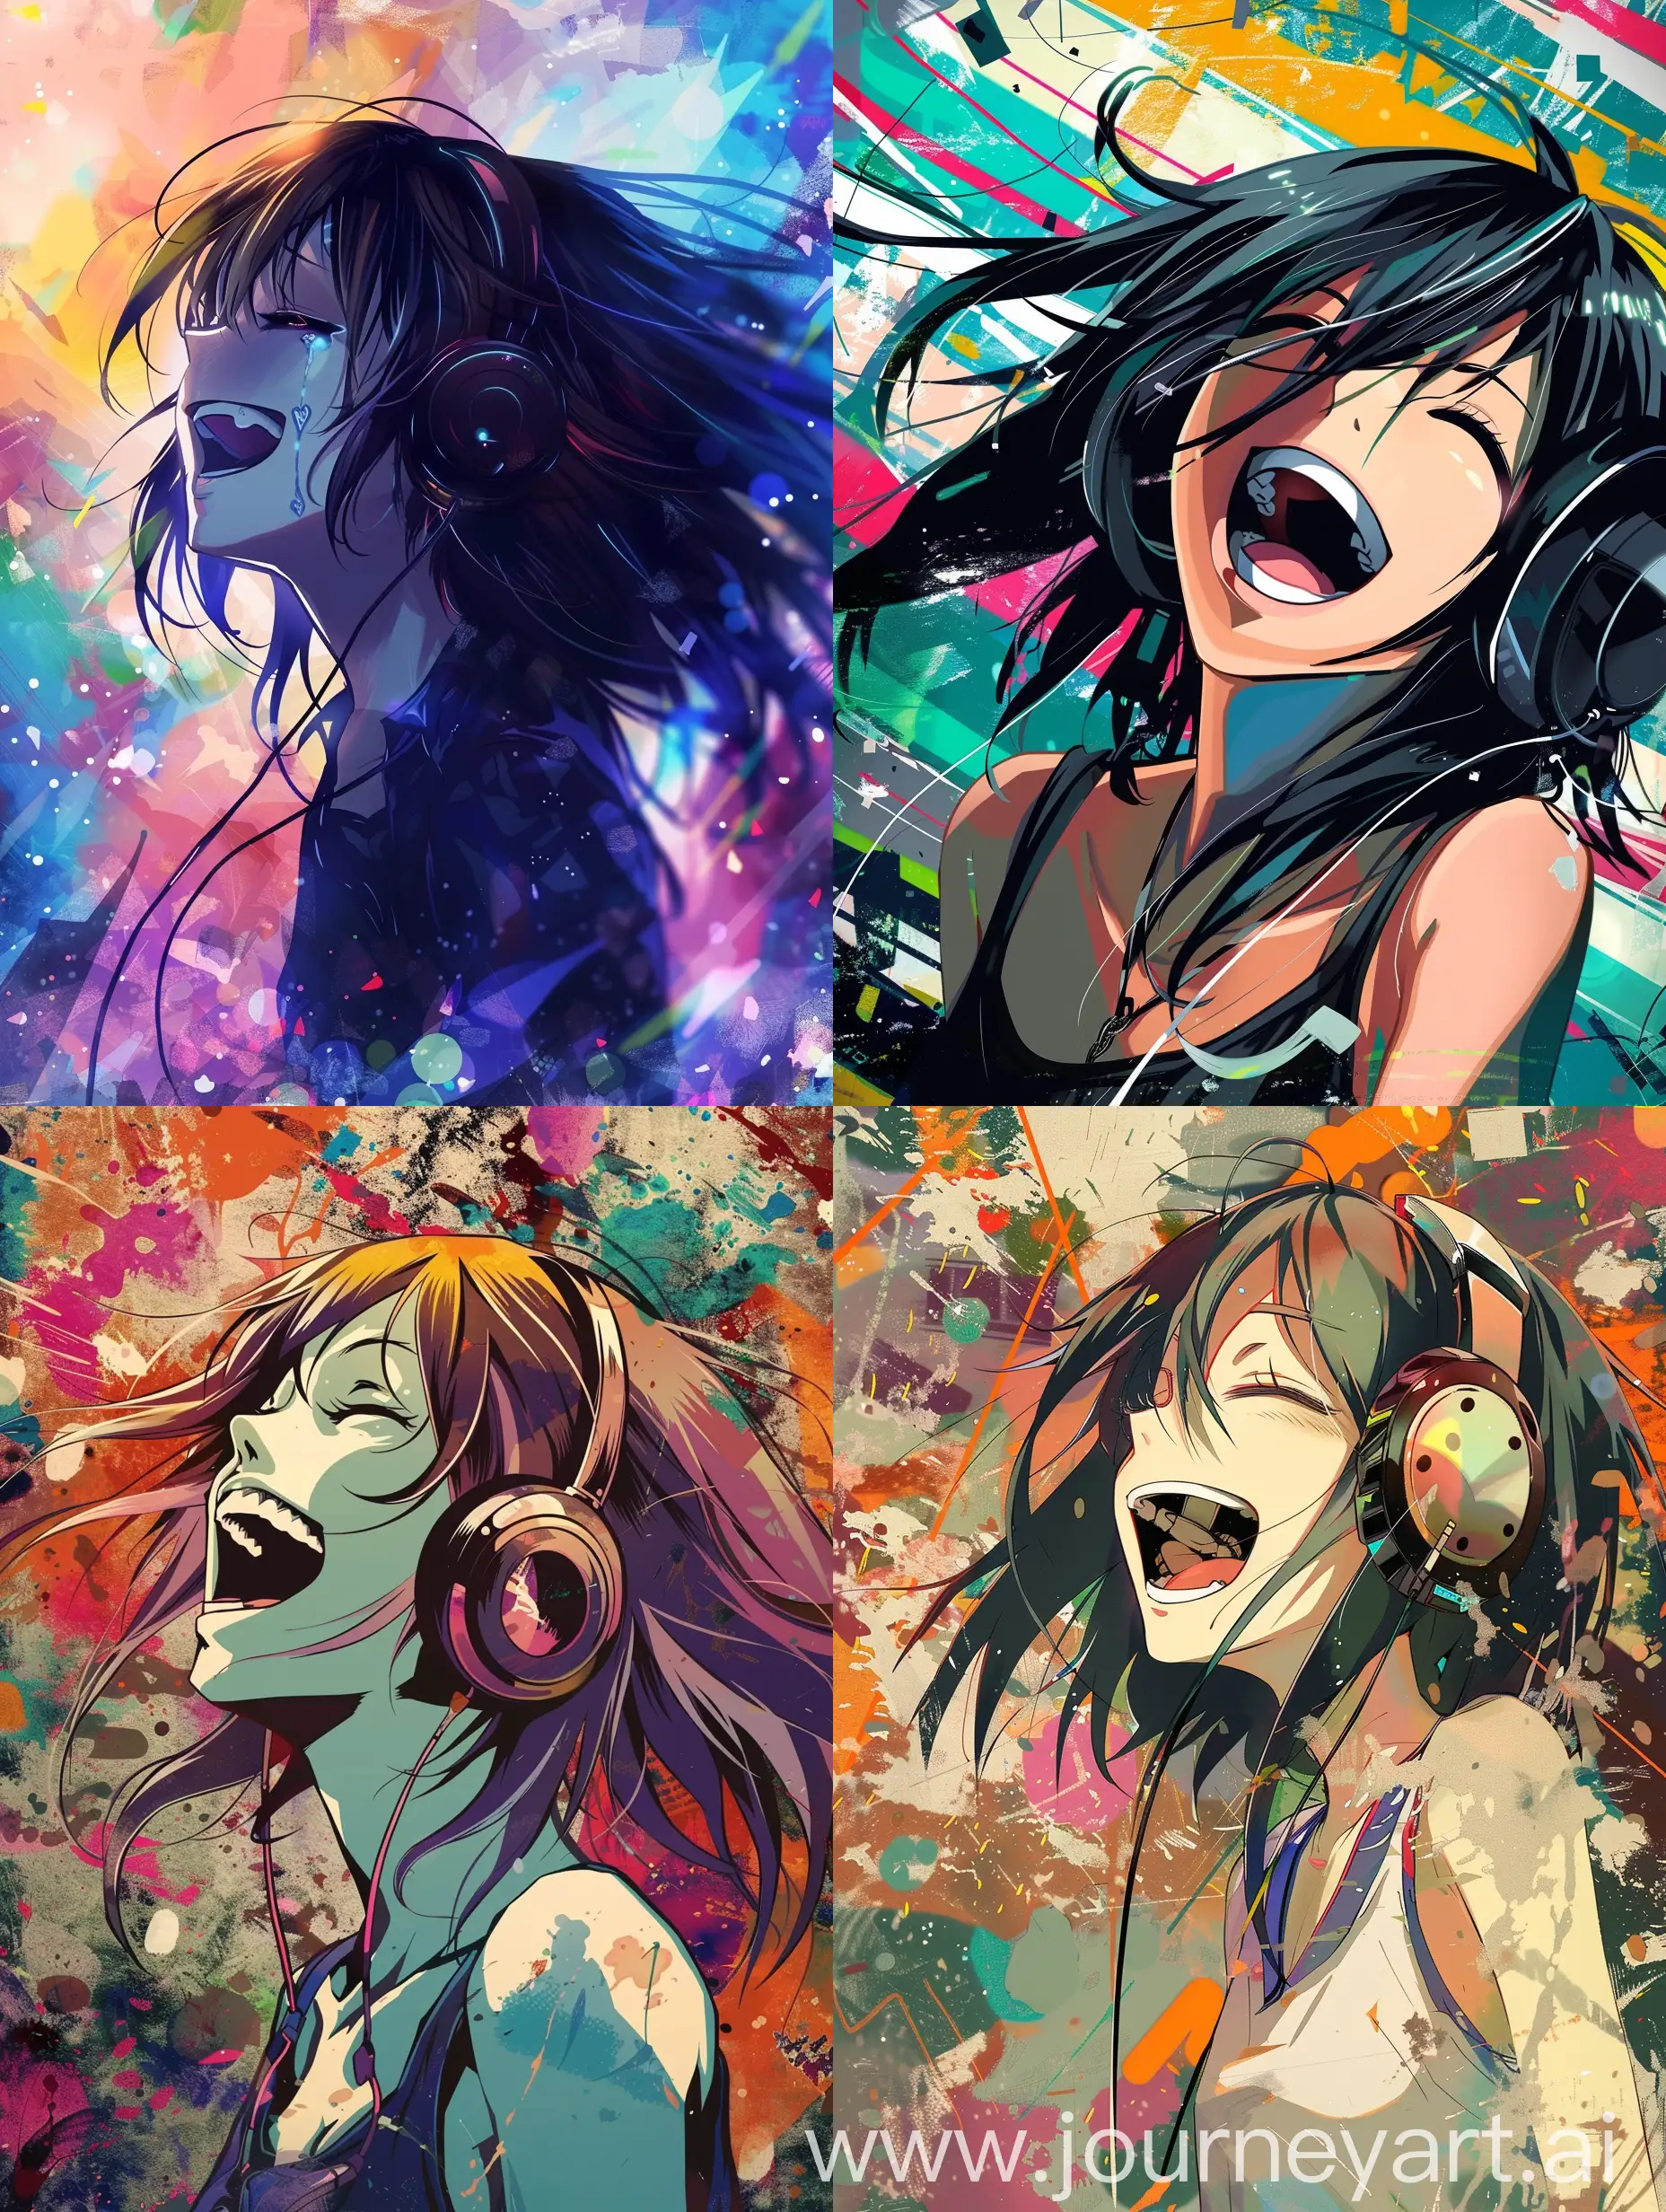 Laughing-Anime-Emo-Girl-with-Headphones-on-Abstract-Background